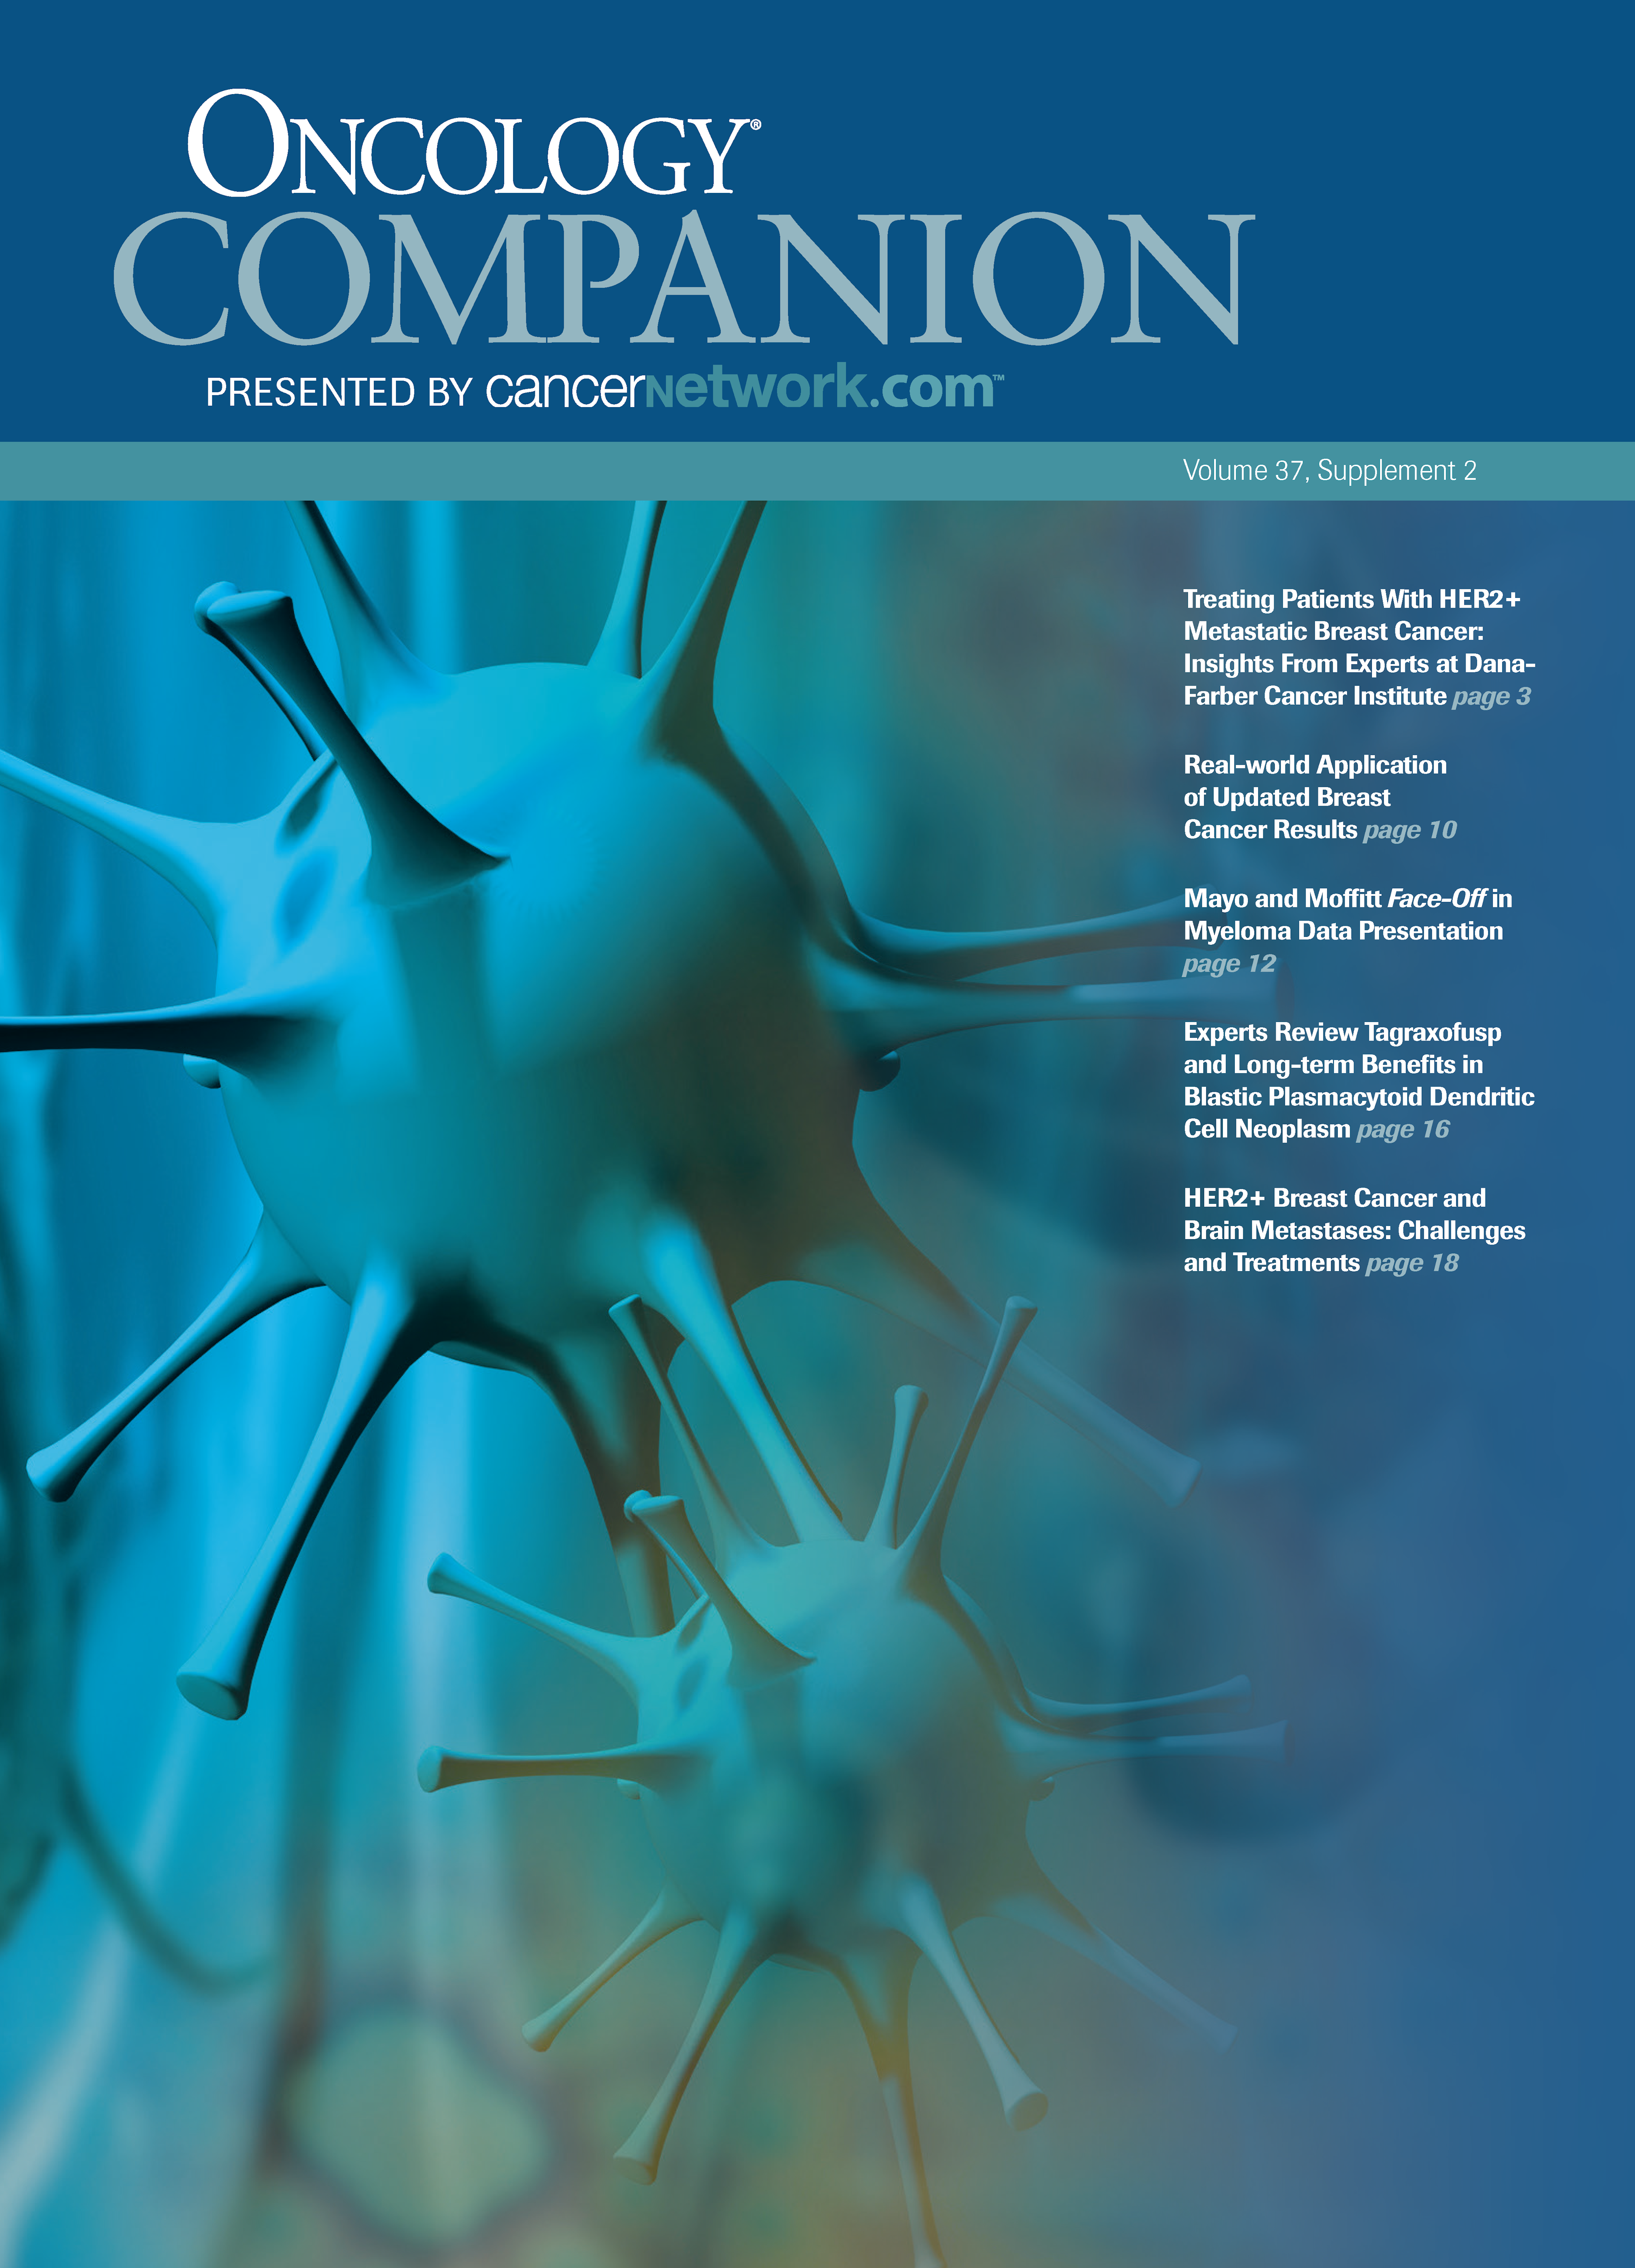 ONCOLOGY® Companion, Volume 37, Supplement 2